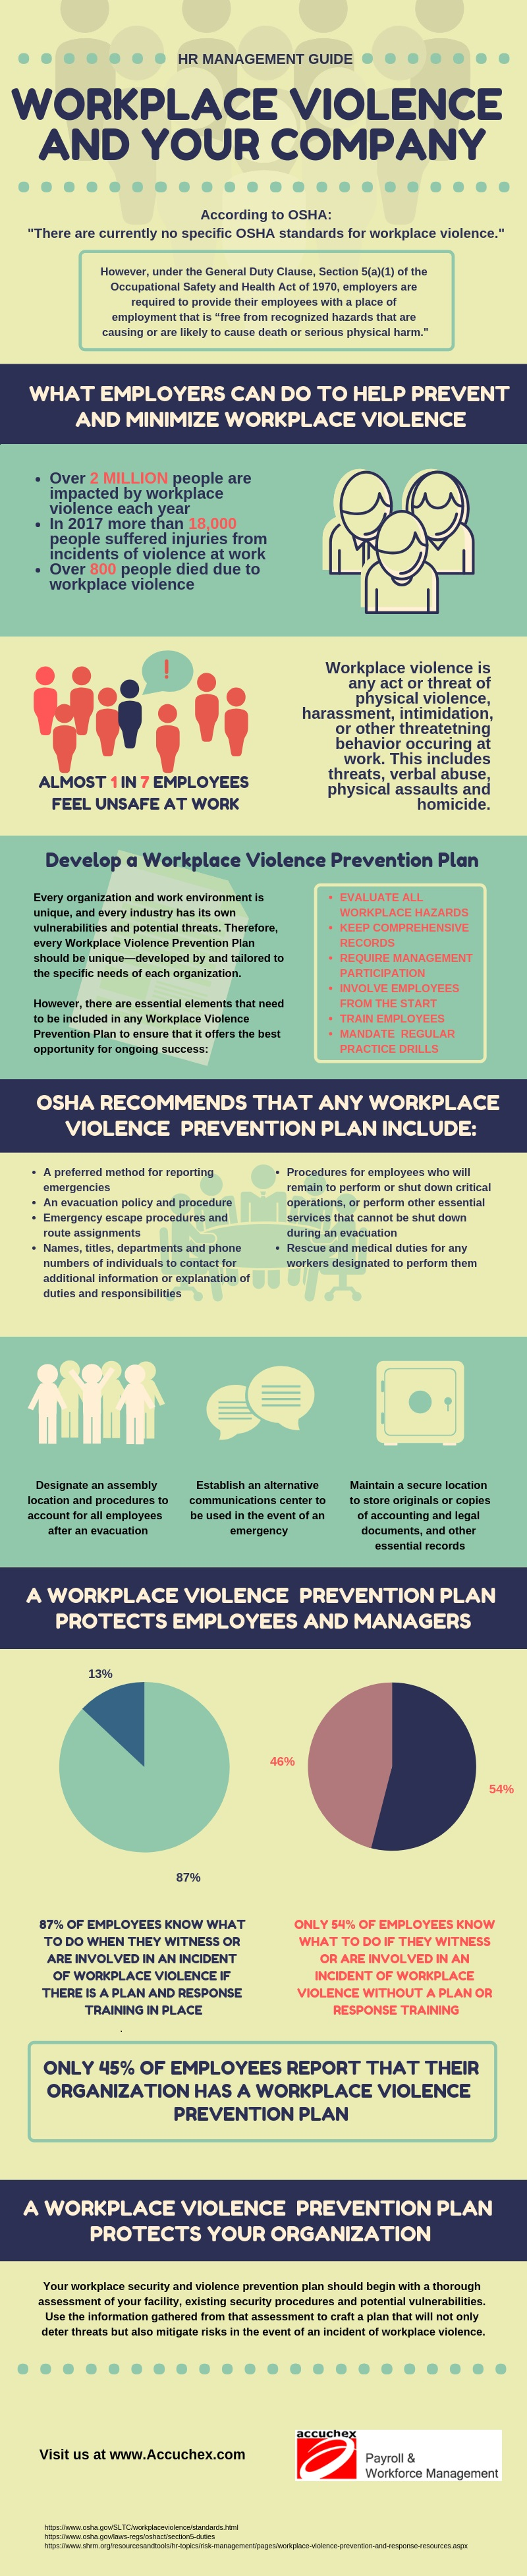 workplace_violence_guide